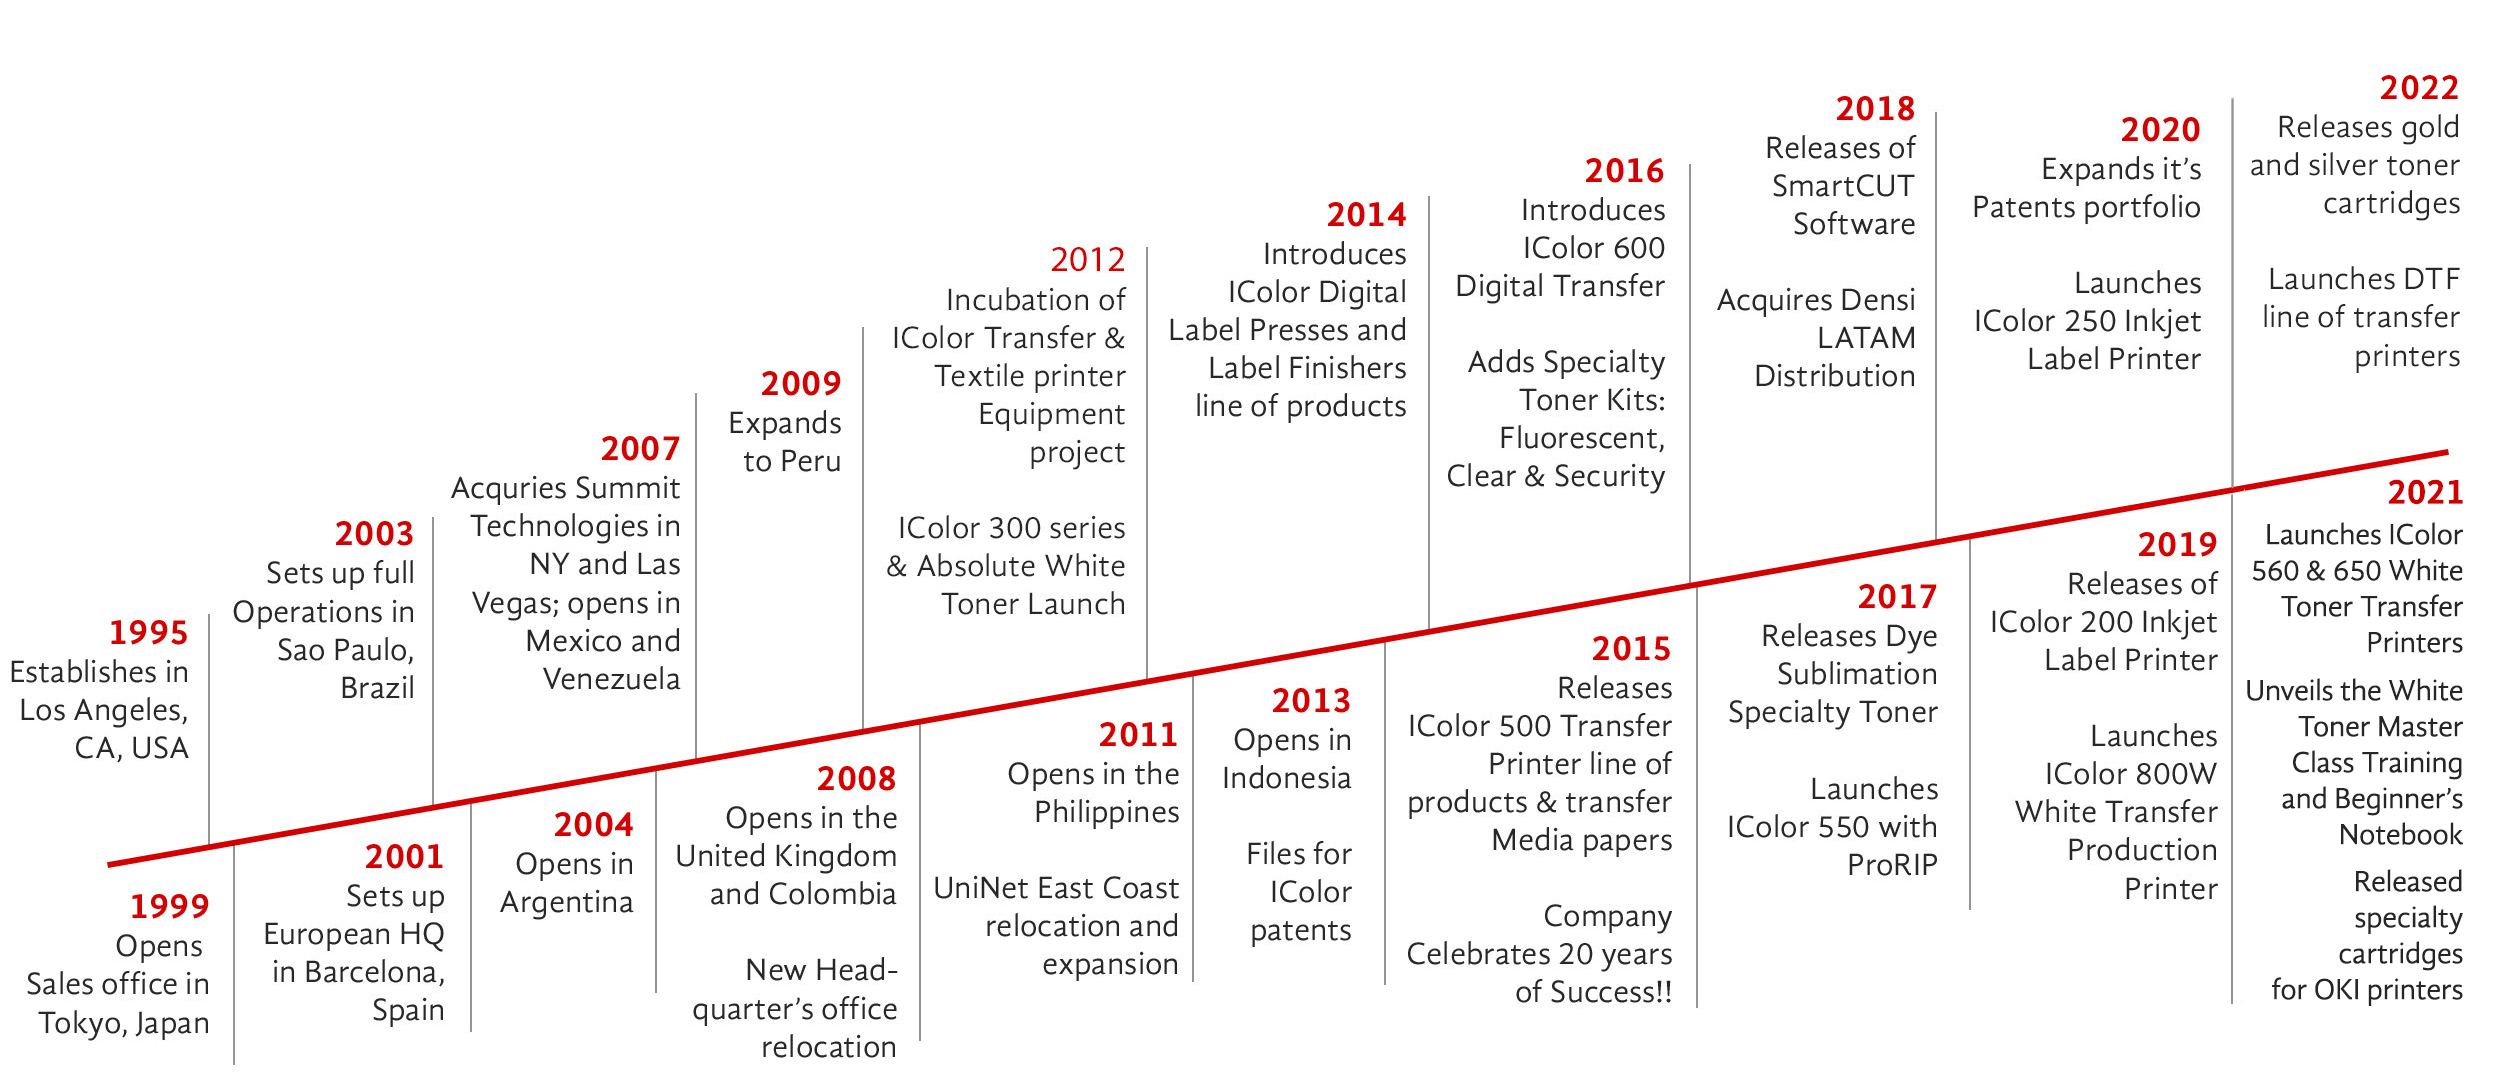 UNINET's timeline of yearly company growth